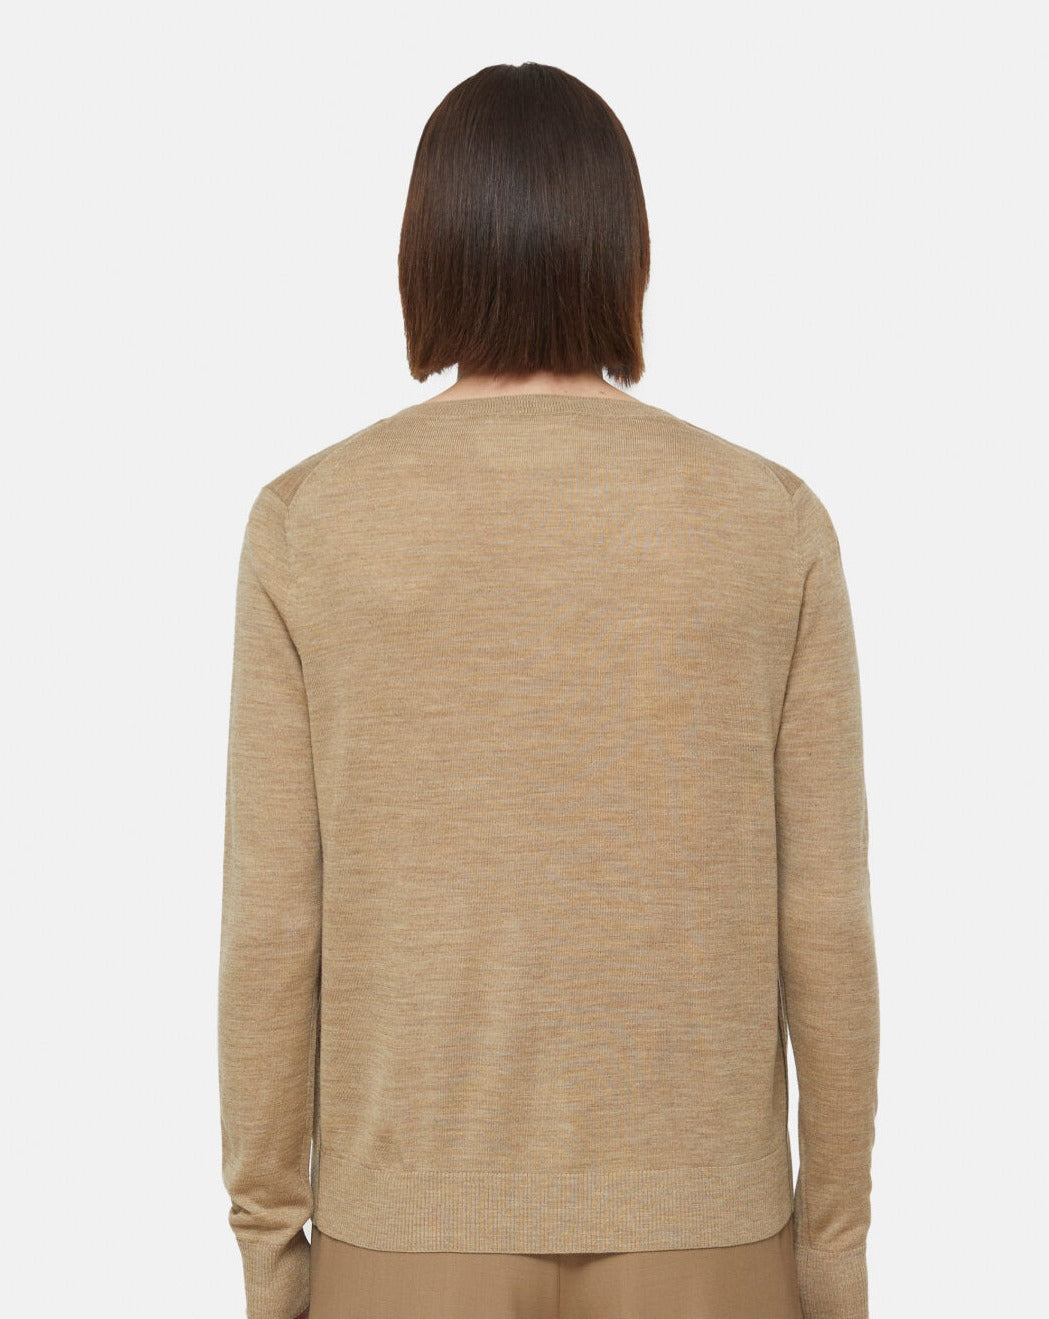 Closed Sweater Woman V-neck Long Sleeve Brown Sugar